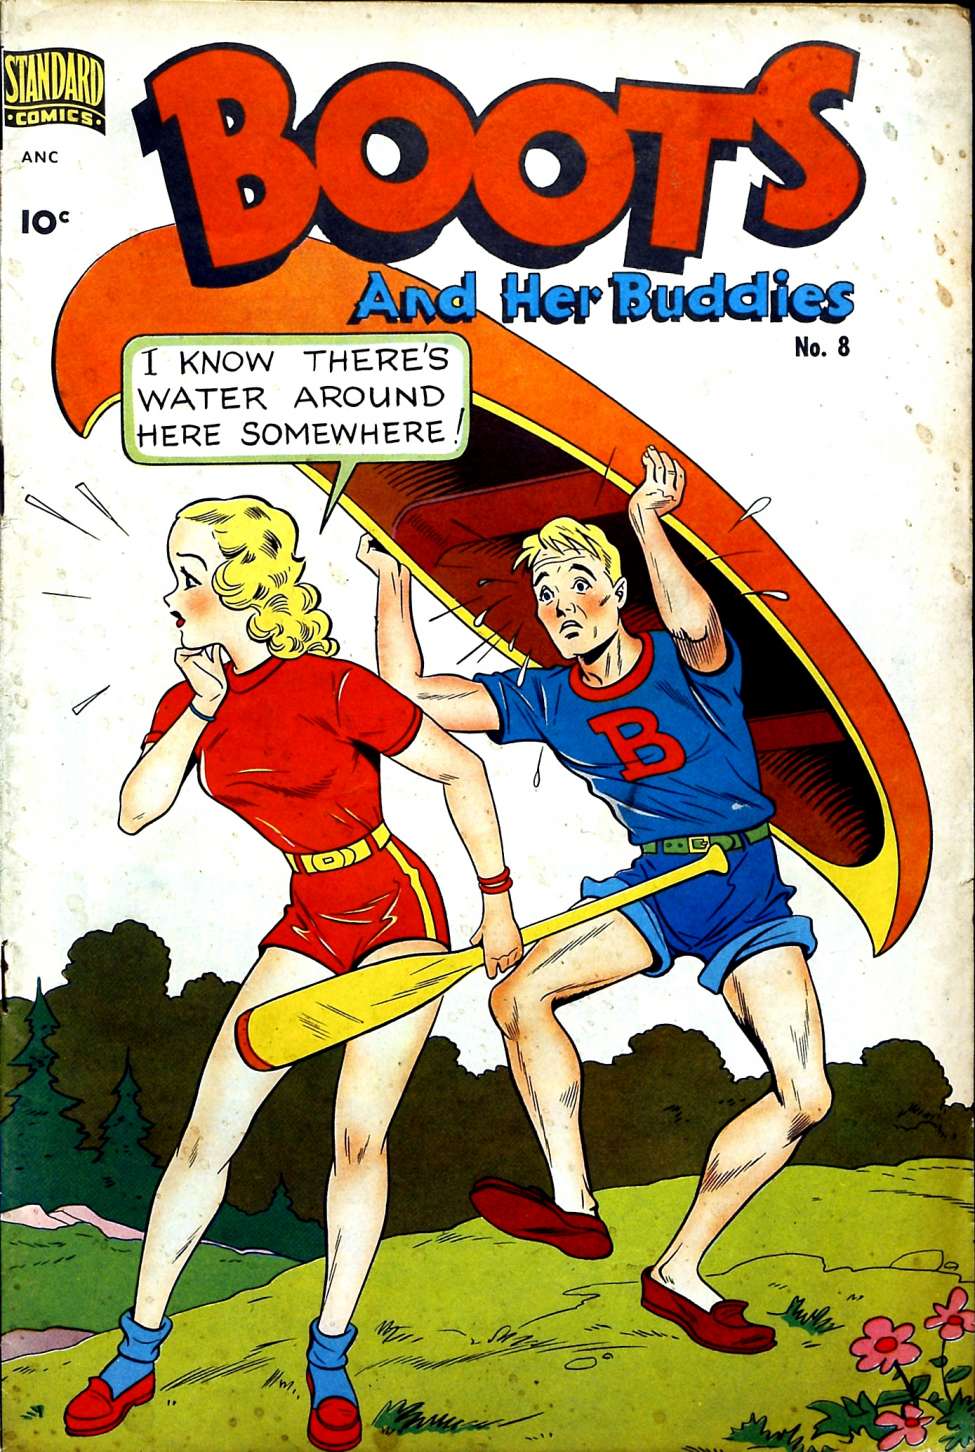 Comic Book Cover For Boots and Her Buddies 8